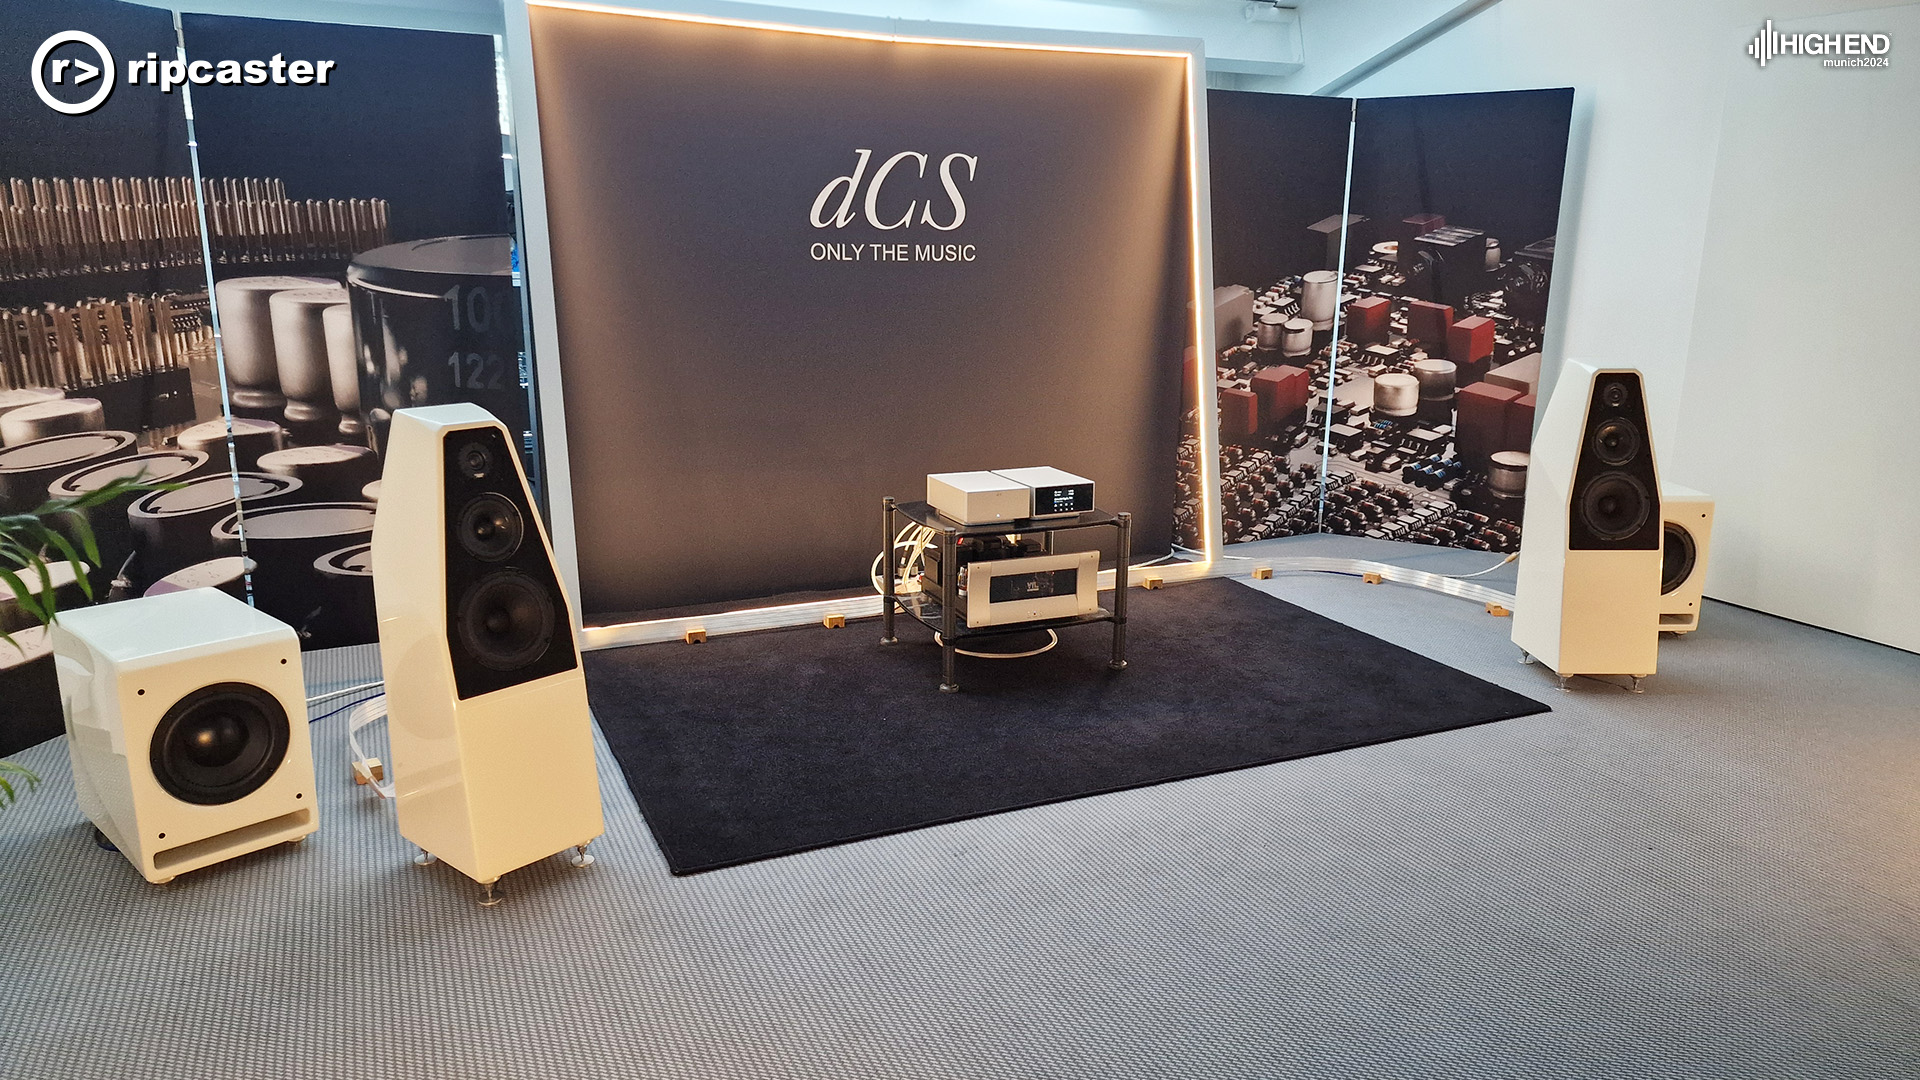 dcs "only the music".  Two pairs of speakers either side of some HiFi equipment on a low stand